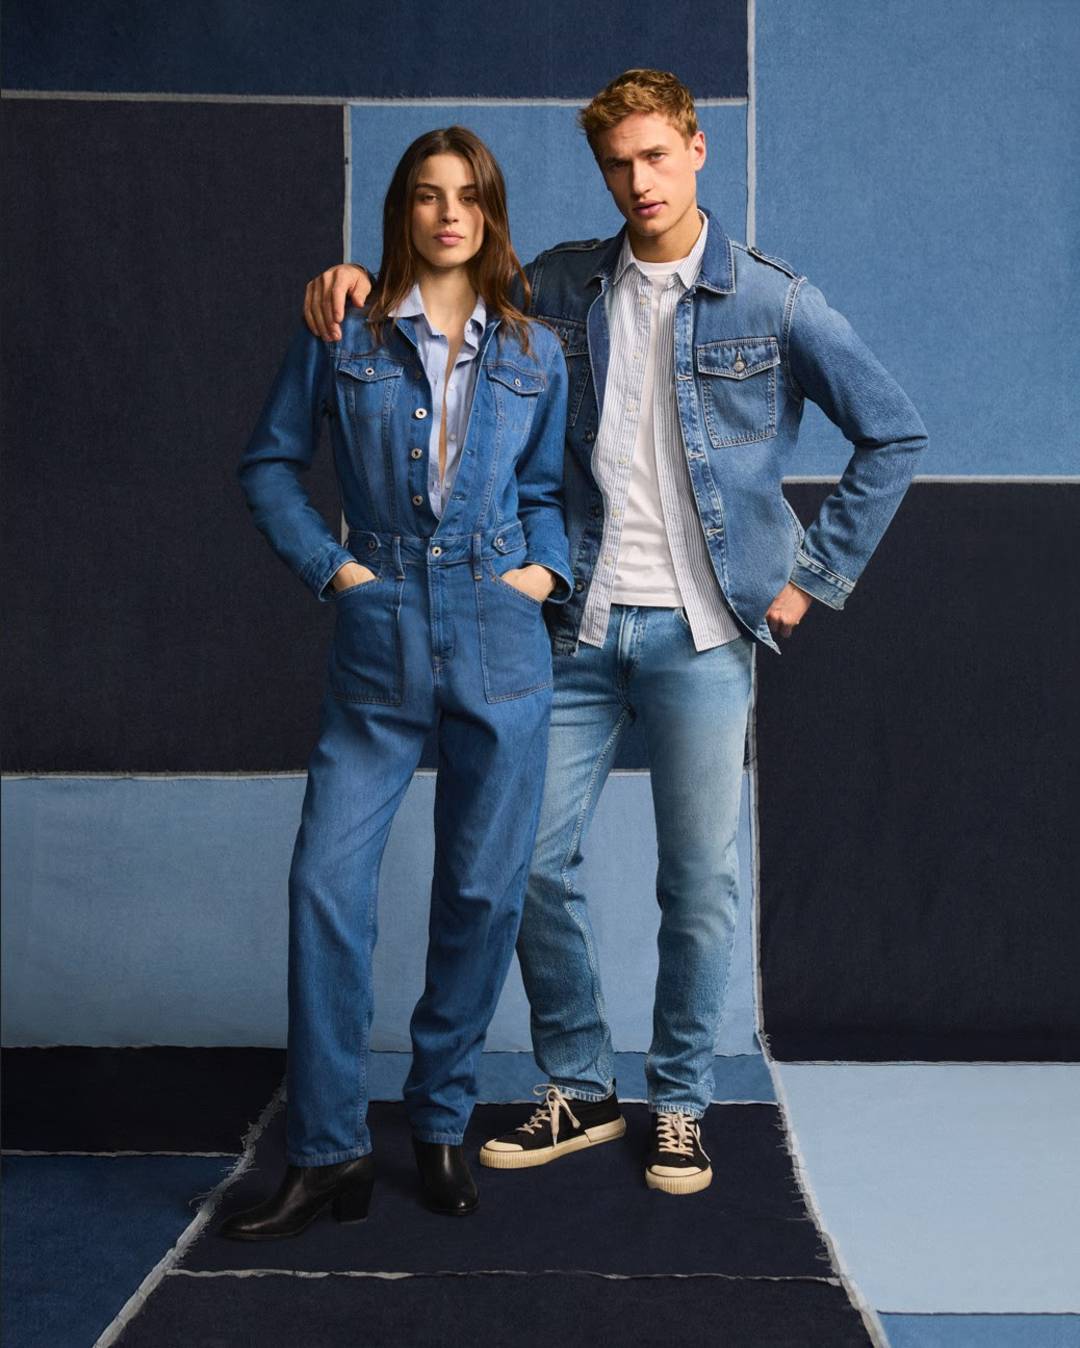 Pepe Jeans, Own Your Denim campaign.